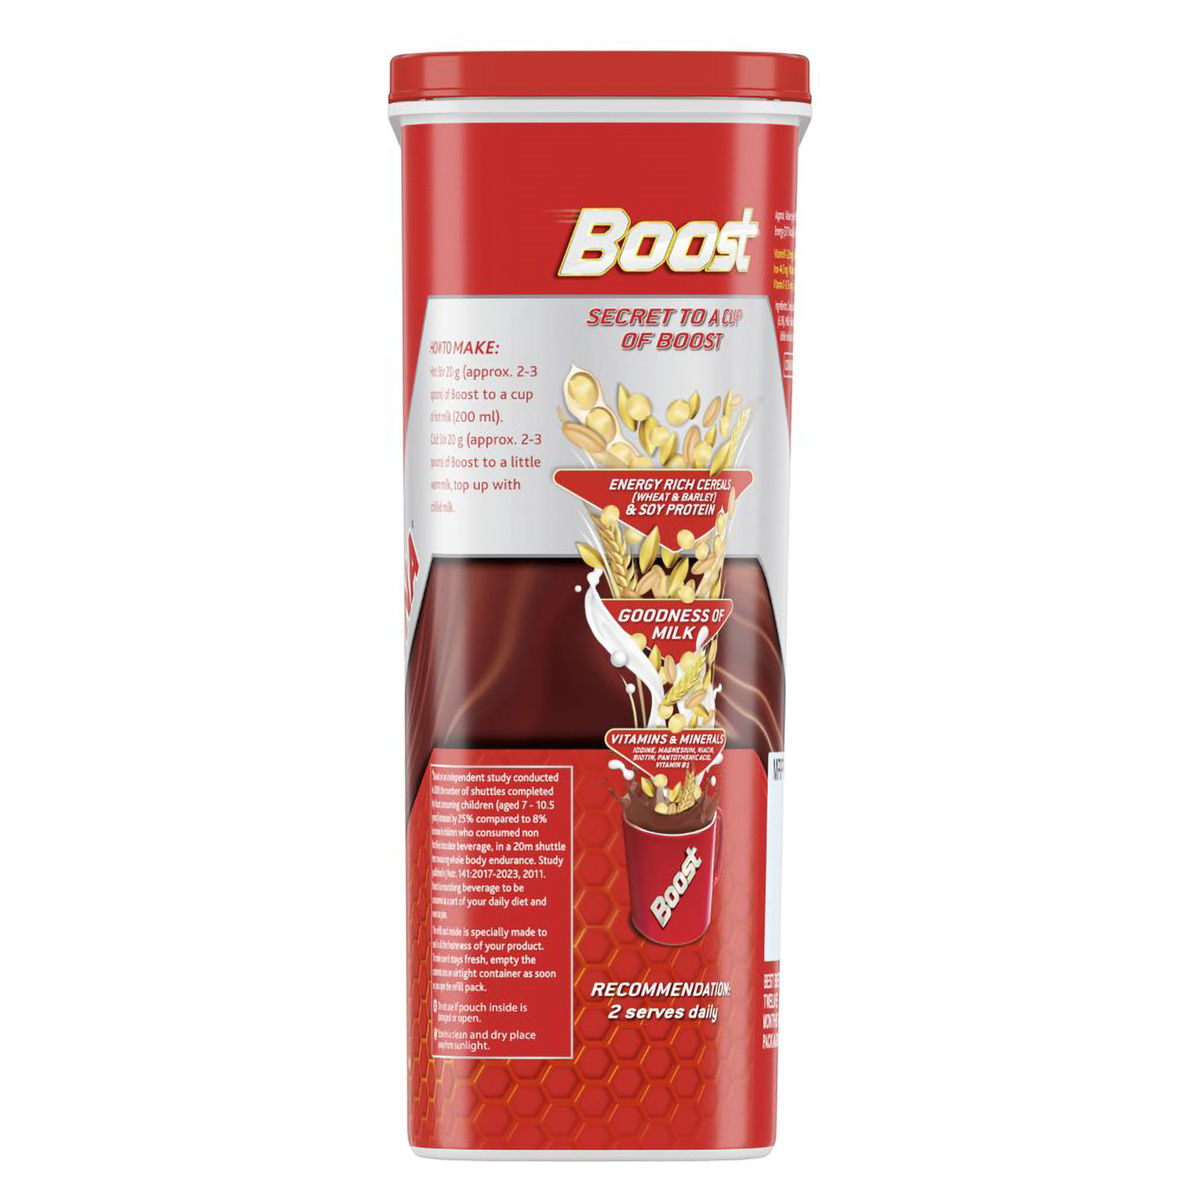 Buy Boost Energy & Nutrition Drink - 3X More Stamina Online at Best Price  of Rs 493.85 - bigbasket